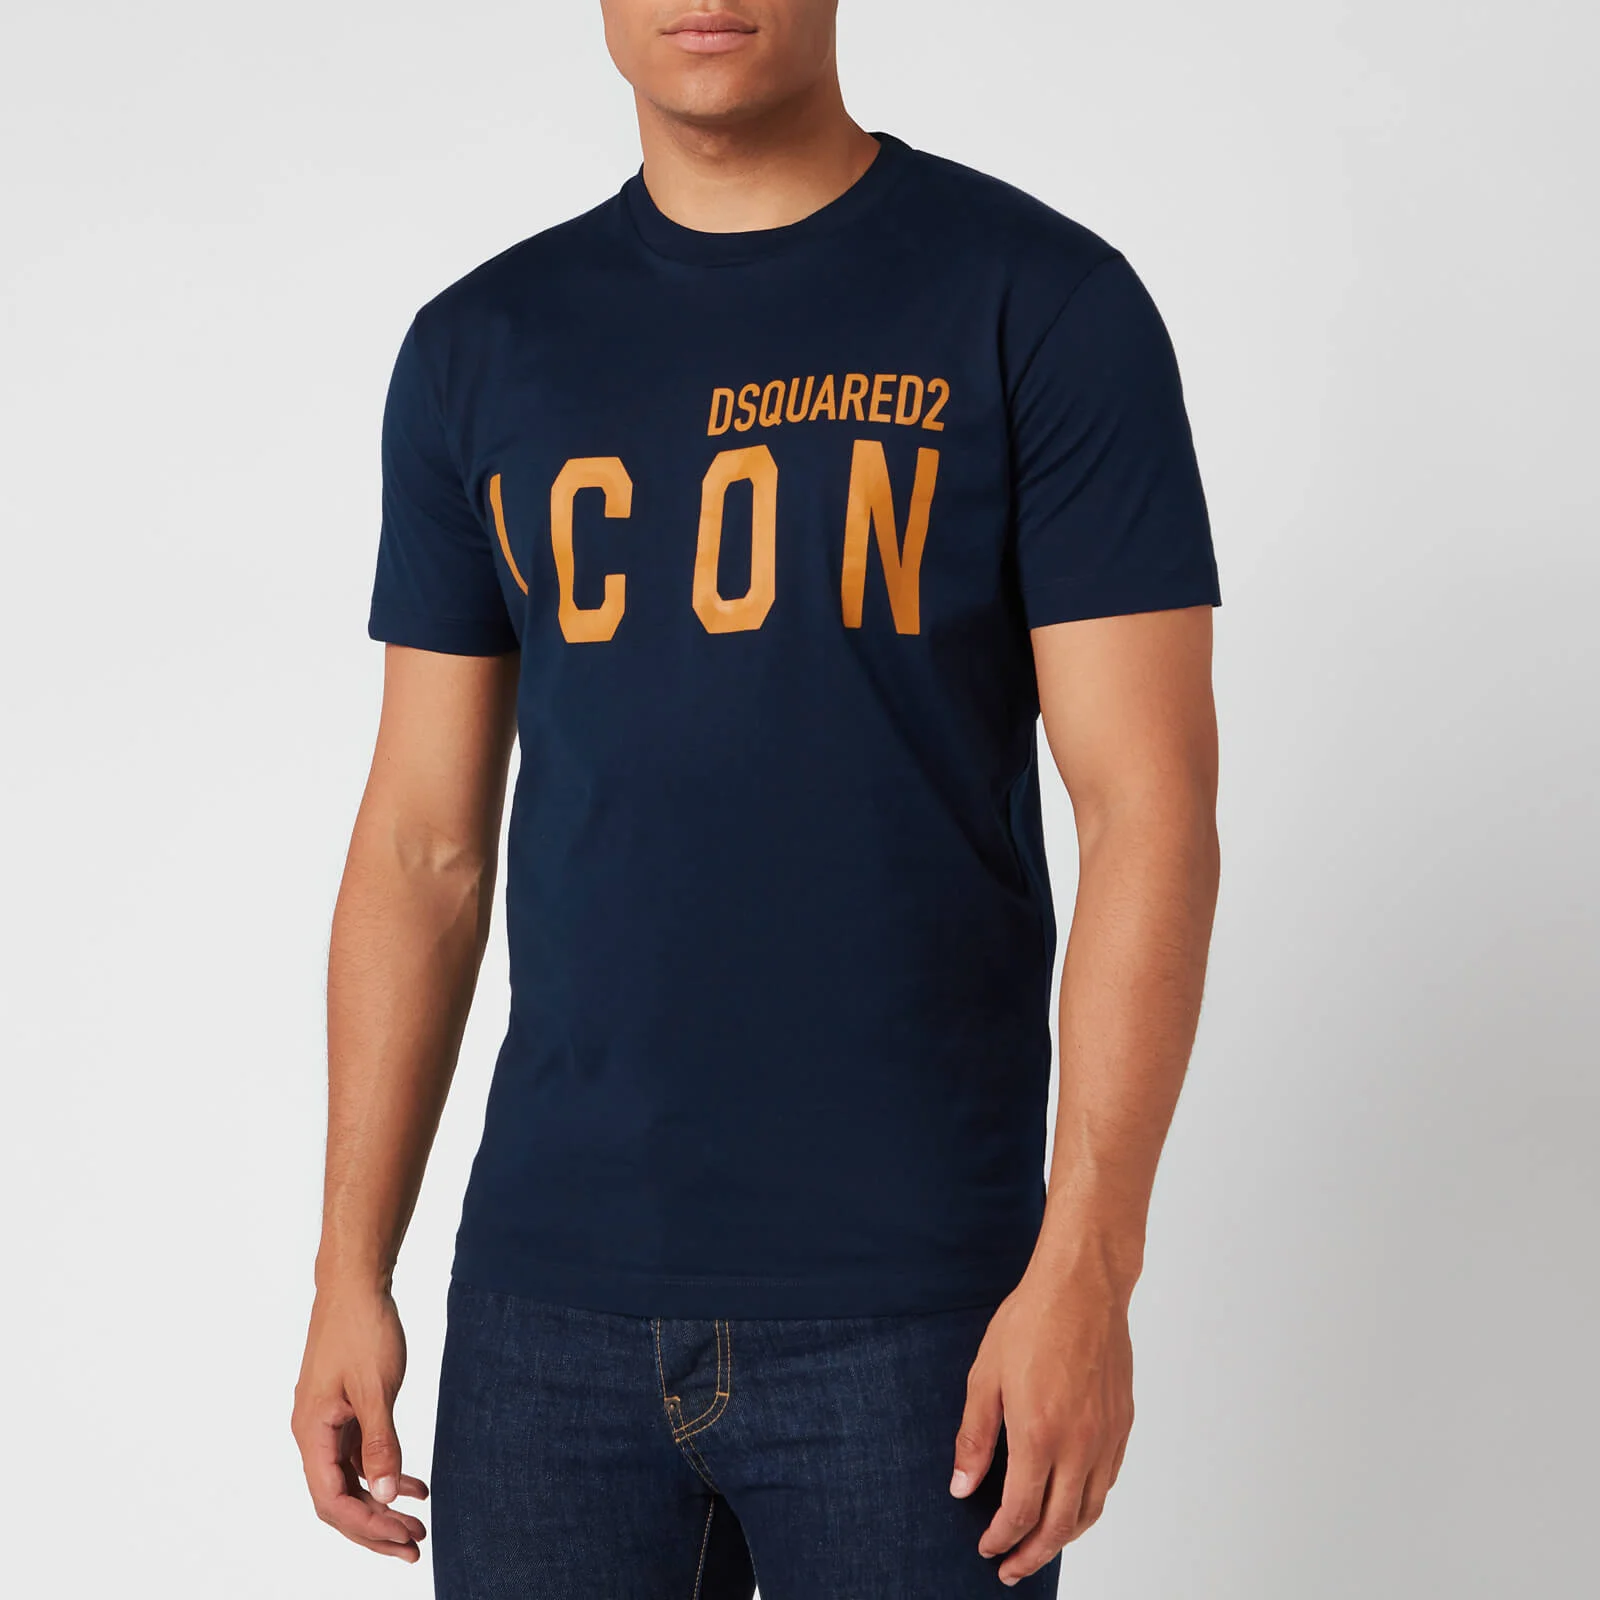 Dsquared2 Men's Cool Fit Icon T-Shirt - Navy Image 1